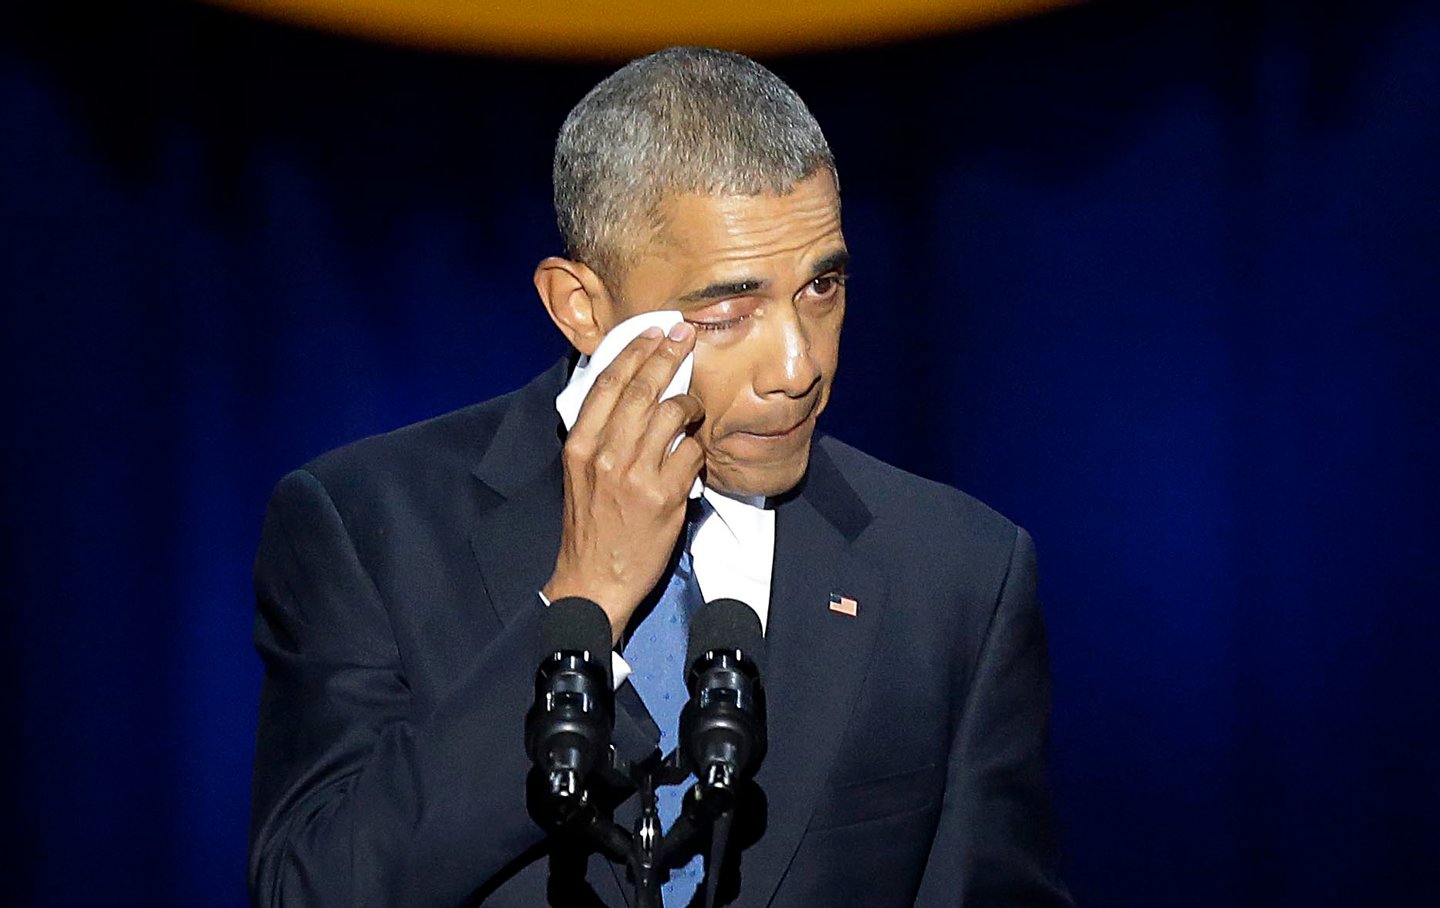 US President Barack Obama cries as he speaks during his farewell address in Chicago, Illinois on January 10, 2017. Barack Obama closes the book on his presidency, with a farewell speech in Chicago that will try to lift supporters shaken by Donald Trump's shock election. / AFP / Joshua LOTT (Photo credit should read JOSHUA LOTT/AFP/Getty Images)